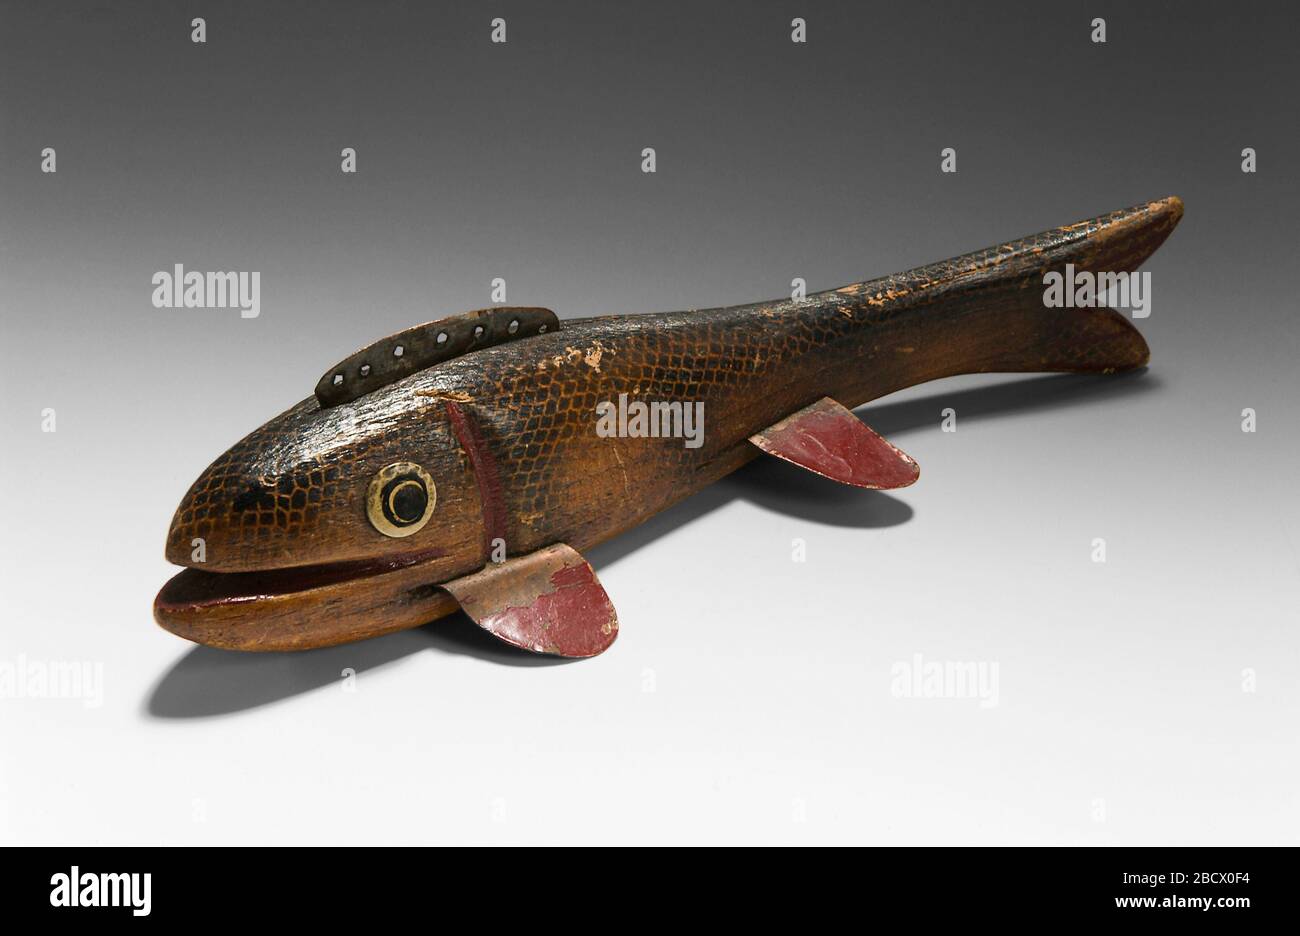 Fish Decoy. Carved fish decoys are one of the earliest forms of American  folk art. Hunters around the Bering Sea first used small bone or ivory  decoys for ice fishing around 1000